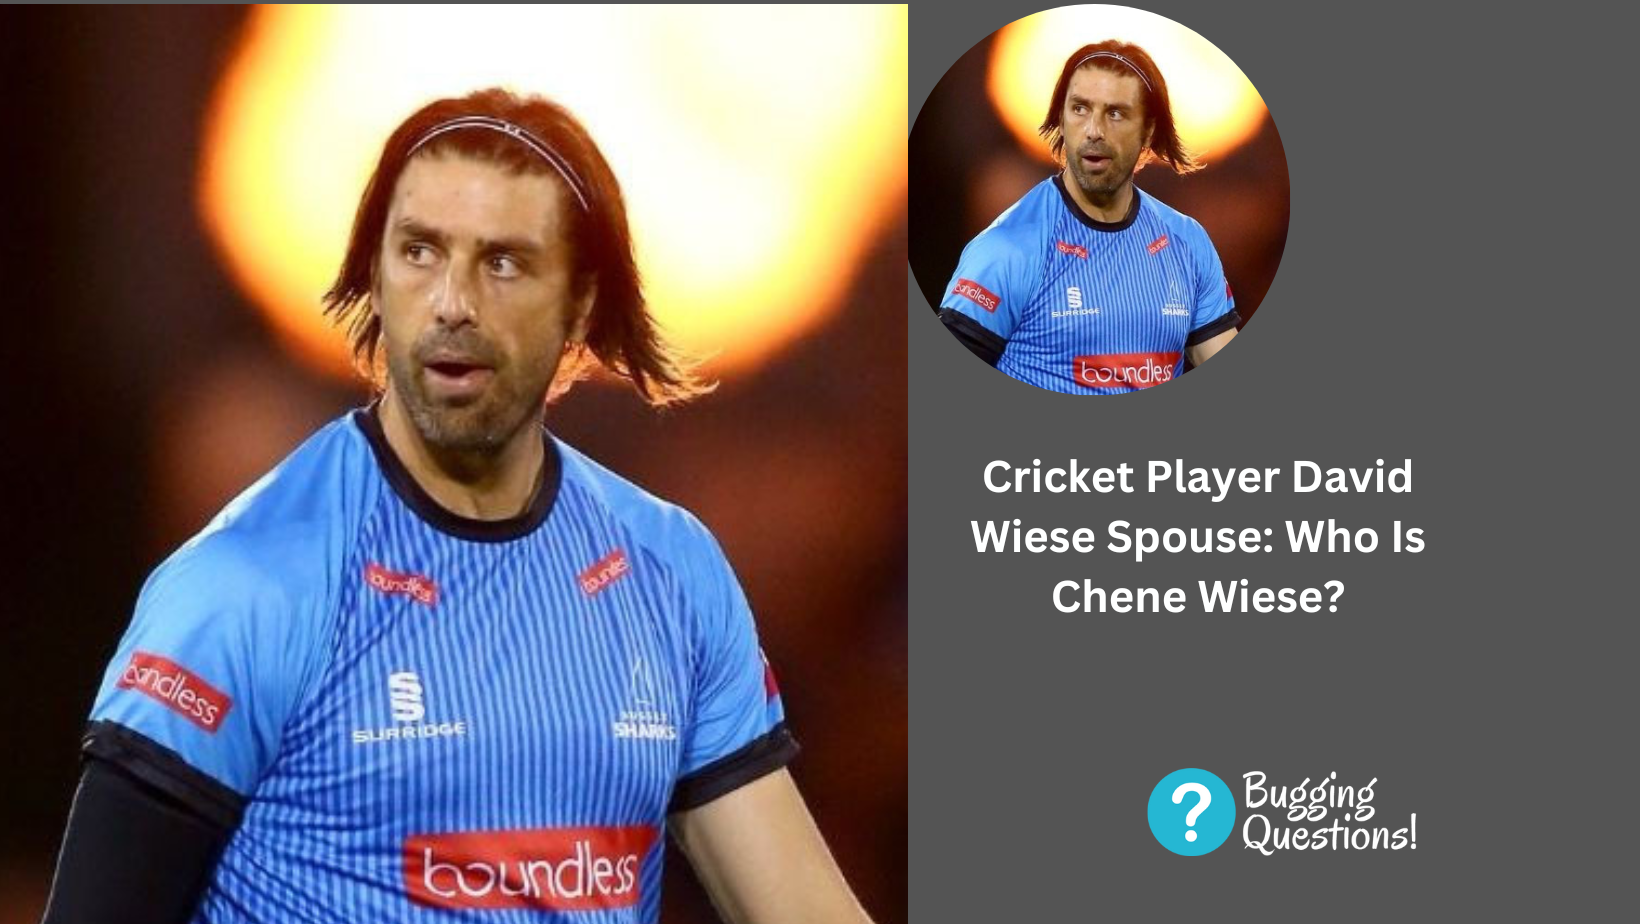 Cricket Player David Wiese Spouse: Who Is Chene Wiese?